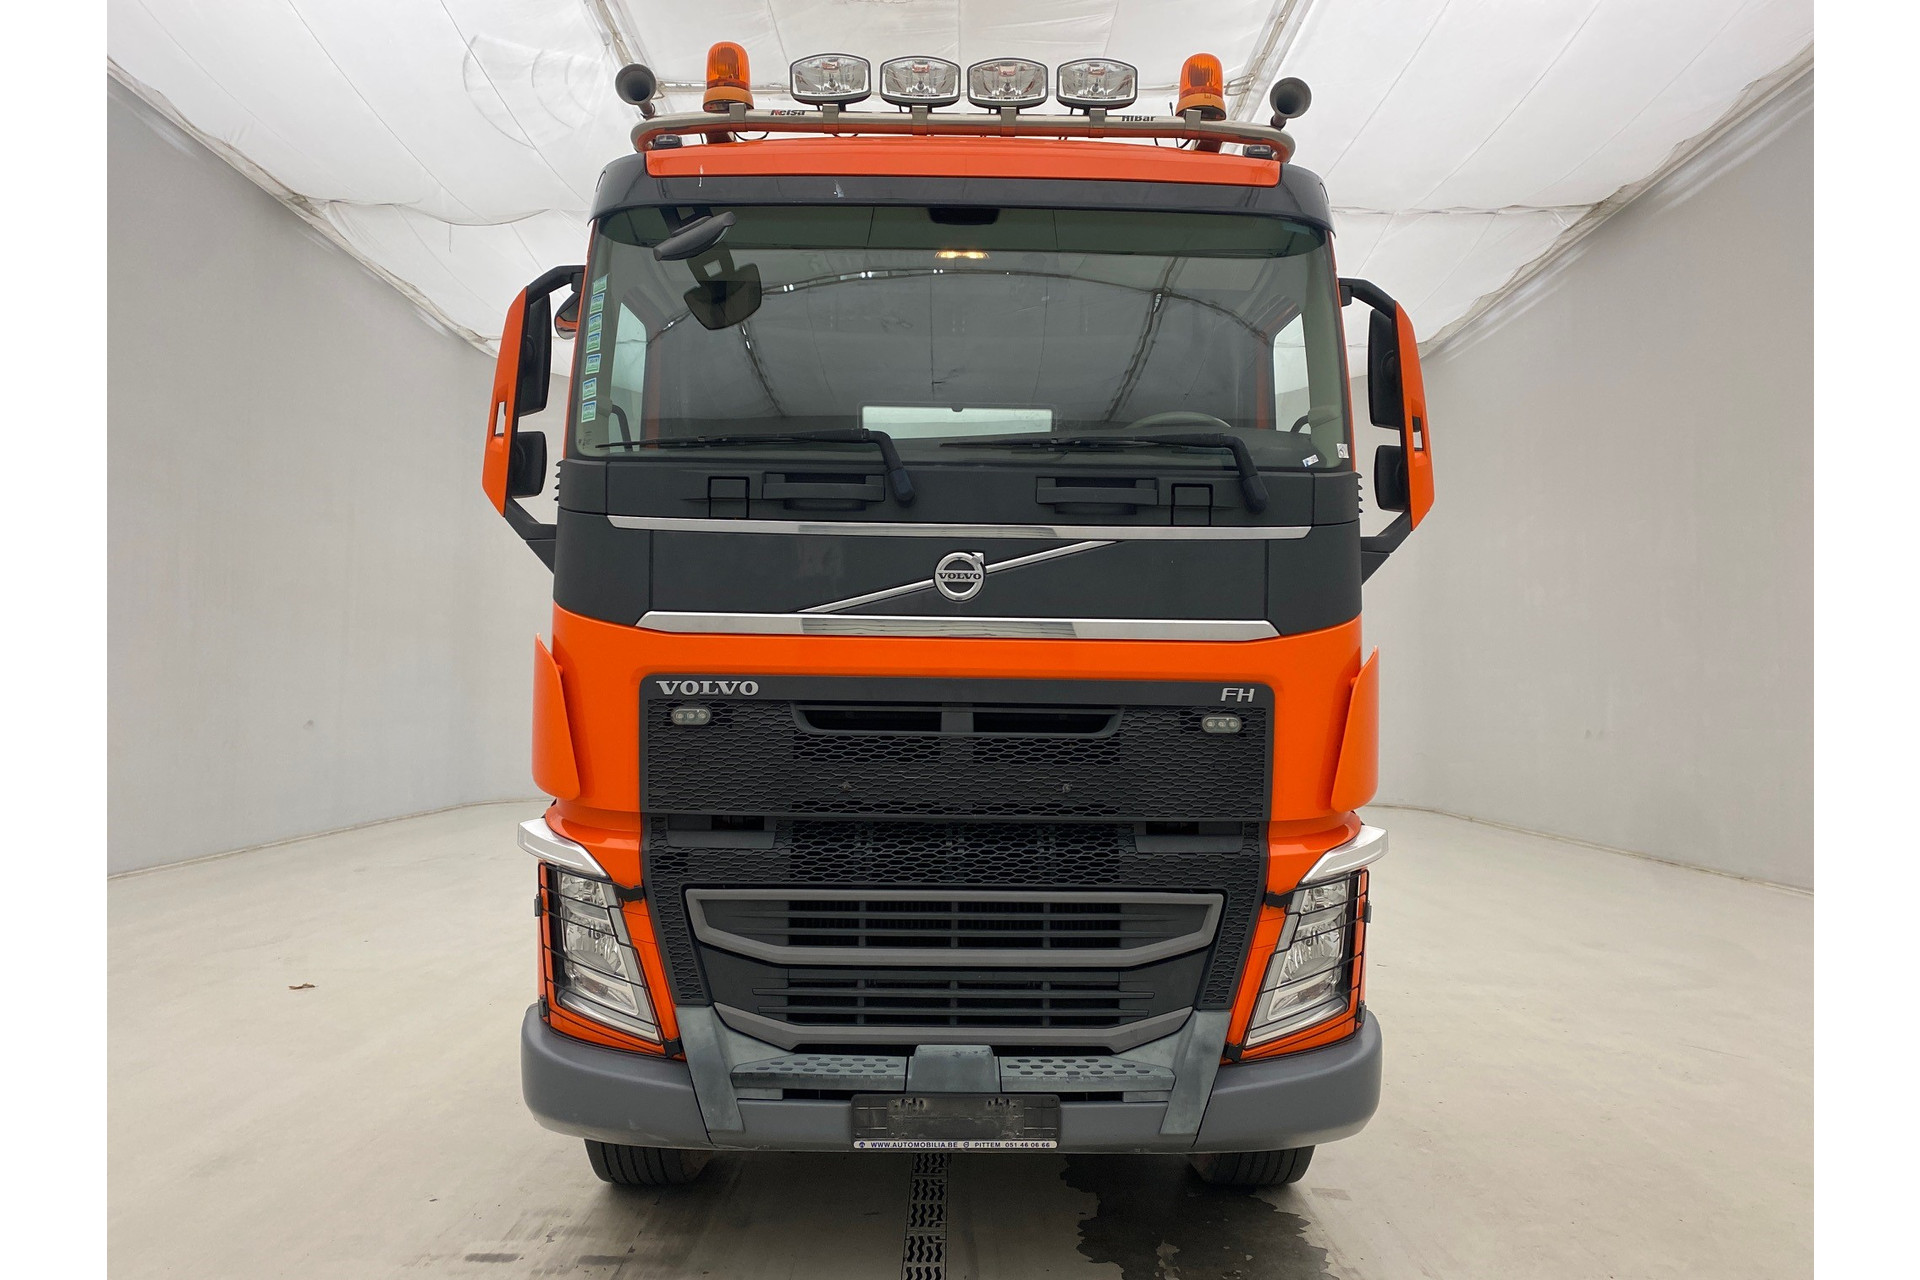 VOLVO FMX 500 – 2016 – 6X4 – CABINE SIMPLES 